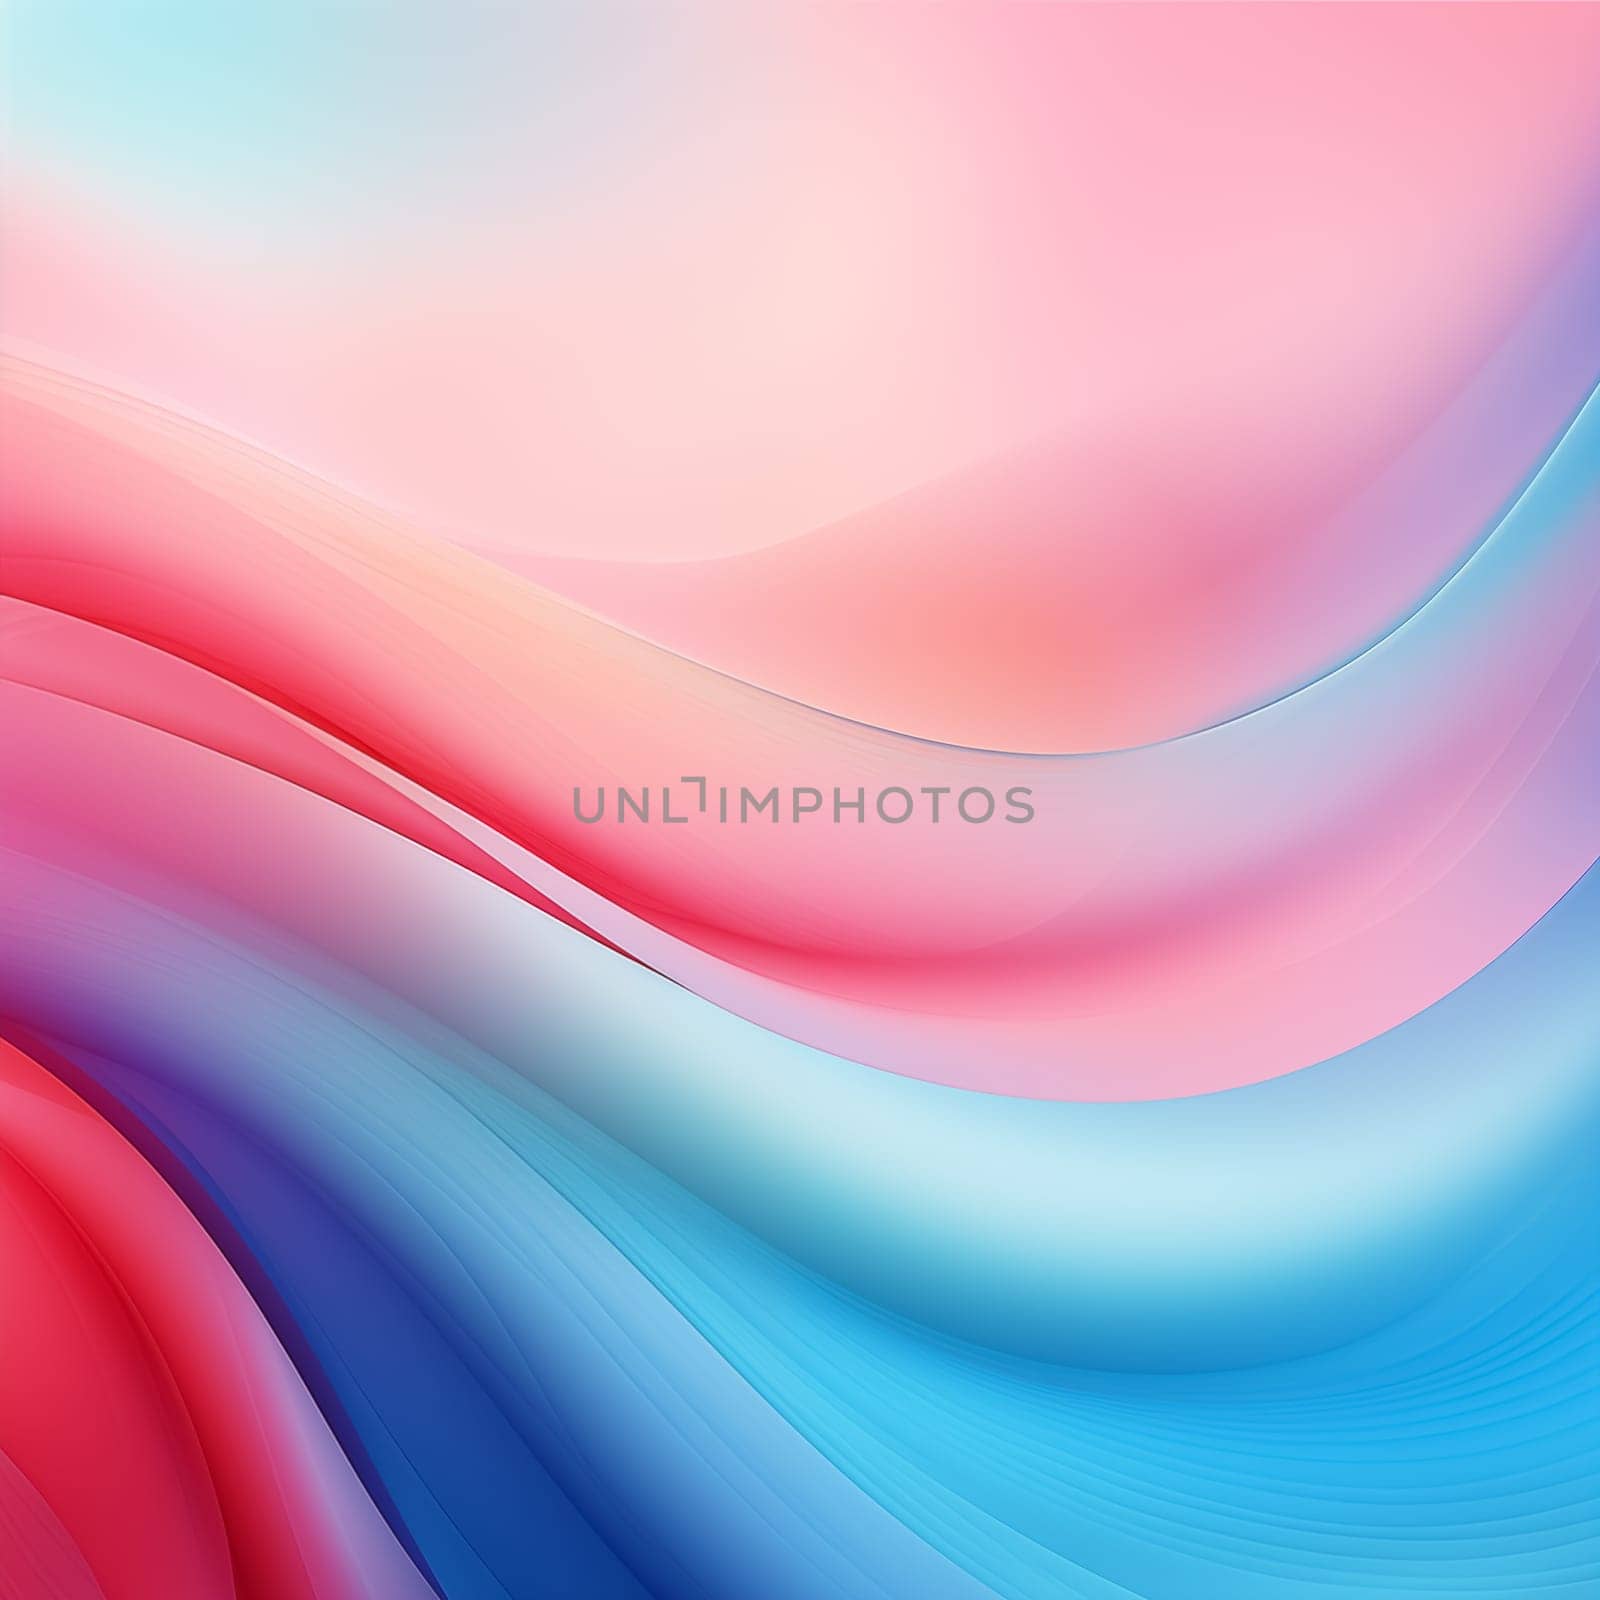 Soft Gradient background. Vibrant Gradient Background. Blurred Color Wave. Blue, pink gradient background. summer and spring concept. Pastel gradient background. Abstract blurred wallpaper by Nadtochiy